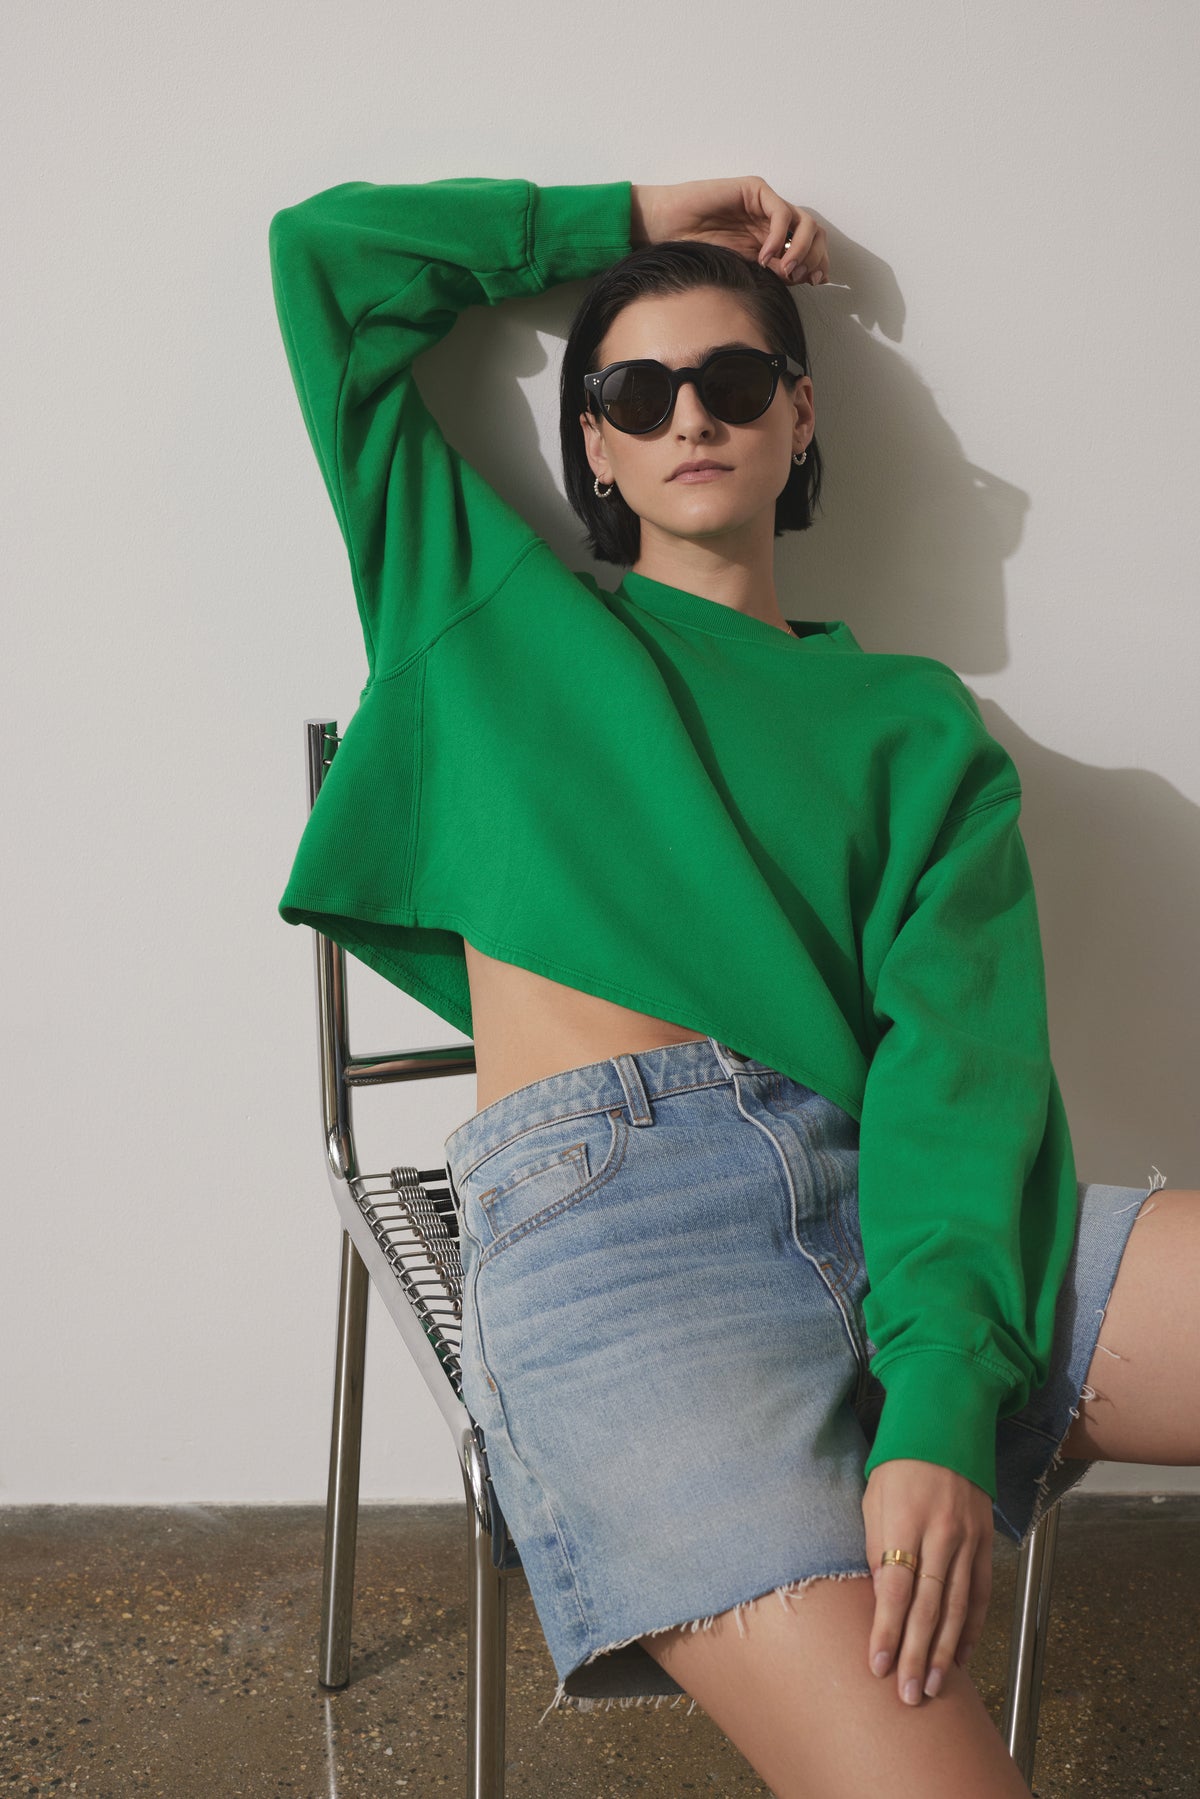 A woman wearing sunglasses, a Velvet by Jenny Graham MALIBU SWEATSHIRT with a crew neckline, and denim shorts leans back on a metal chair against a plain wall.-36863304466625